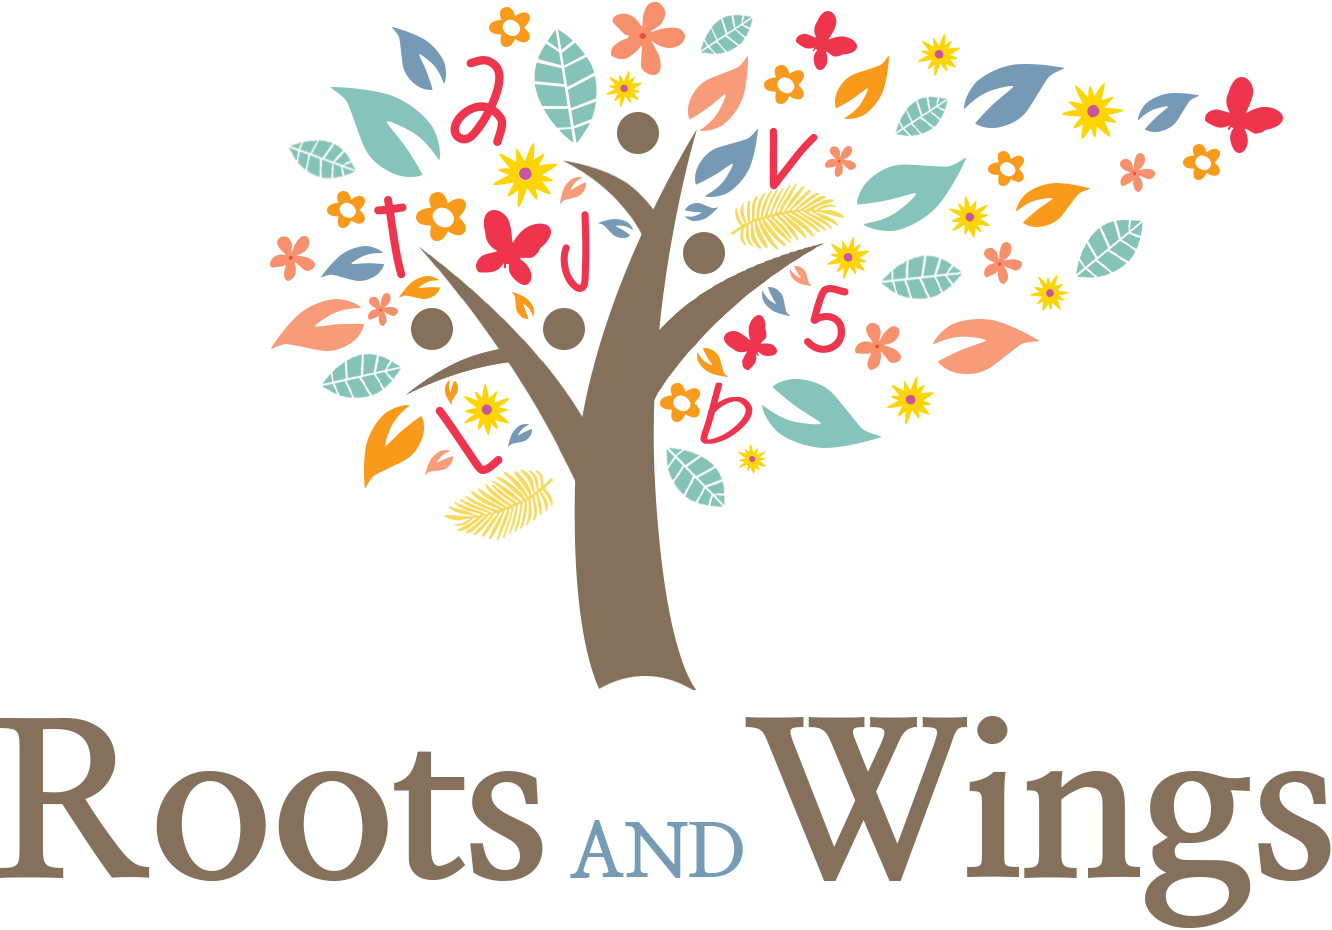 Roots and Wings Logo